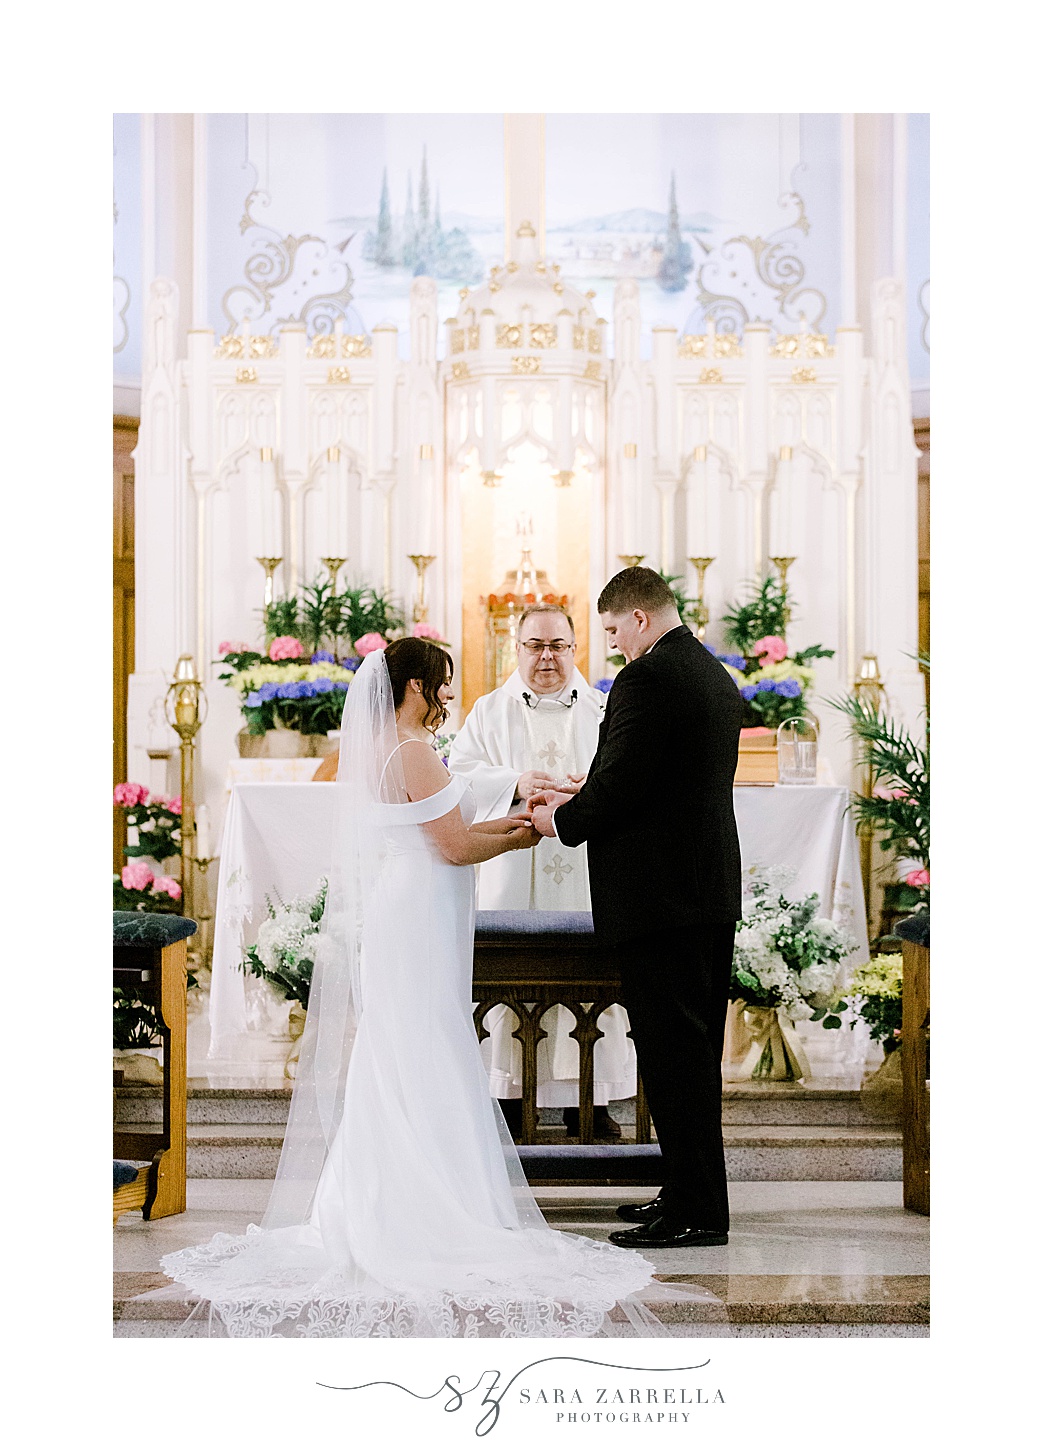 newlyweds hold hands bowing head at alter during wedding ceremony inside Our Lady of the Rosary